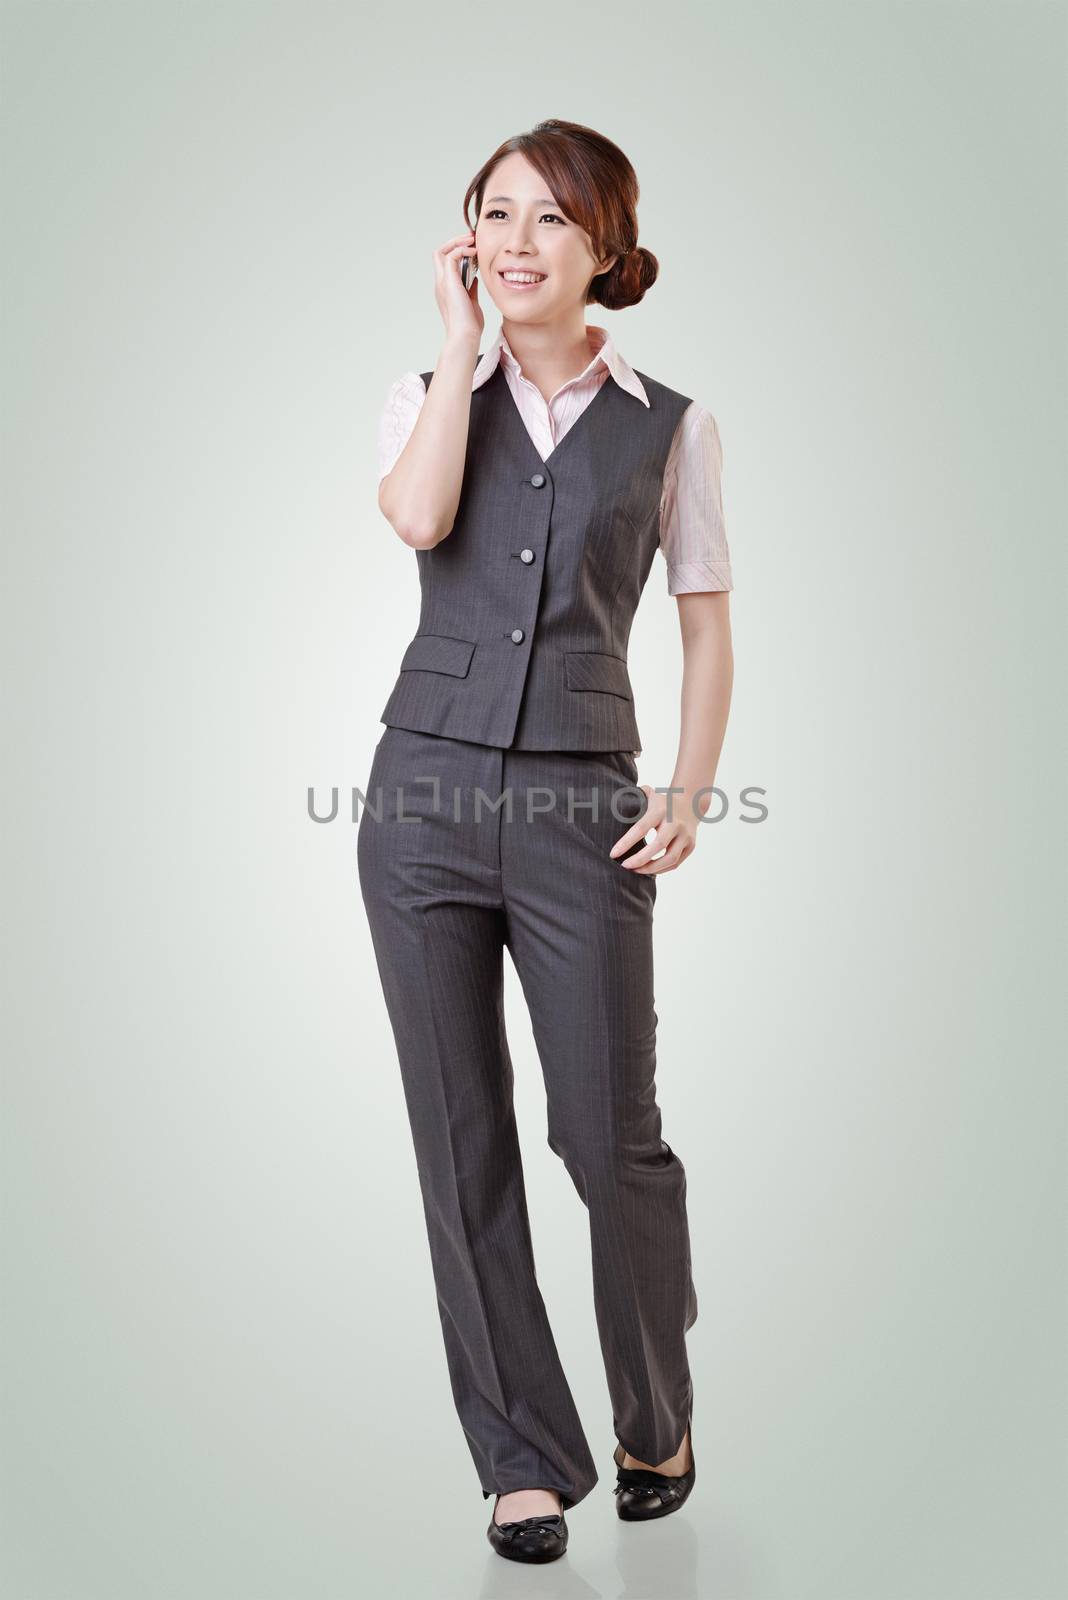 Young business woman talking on cellphone, full length portrait on with clipping path.